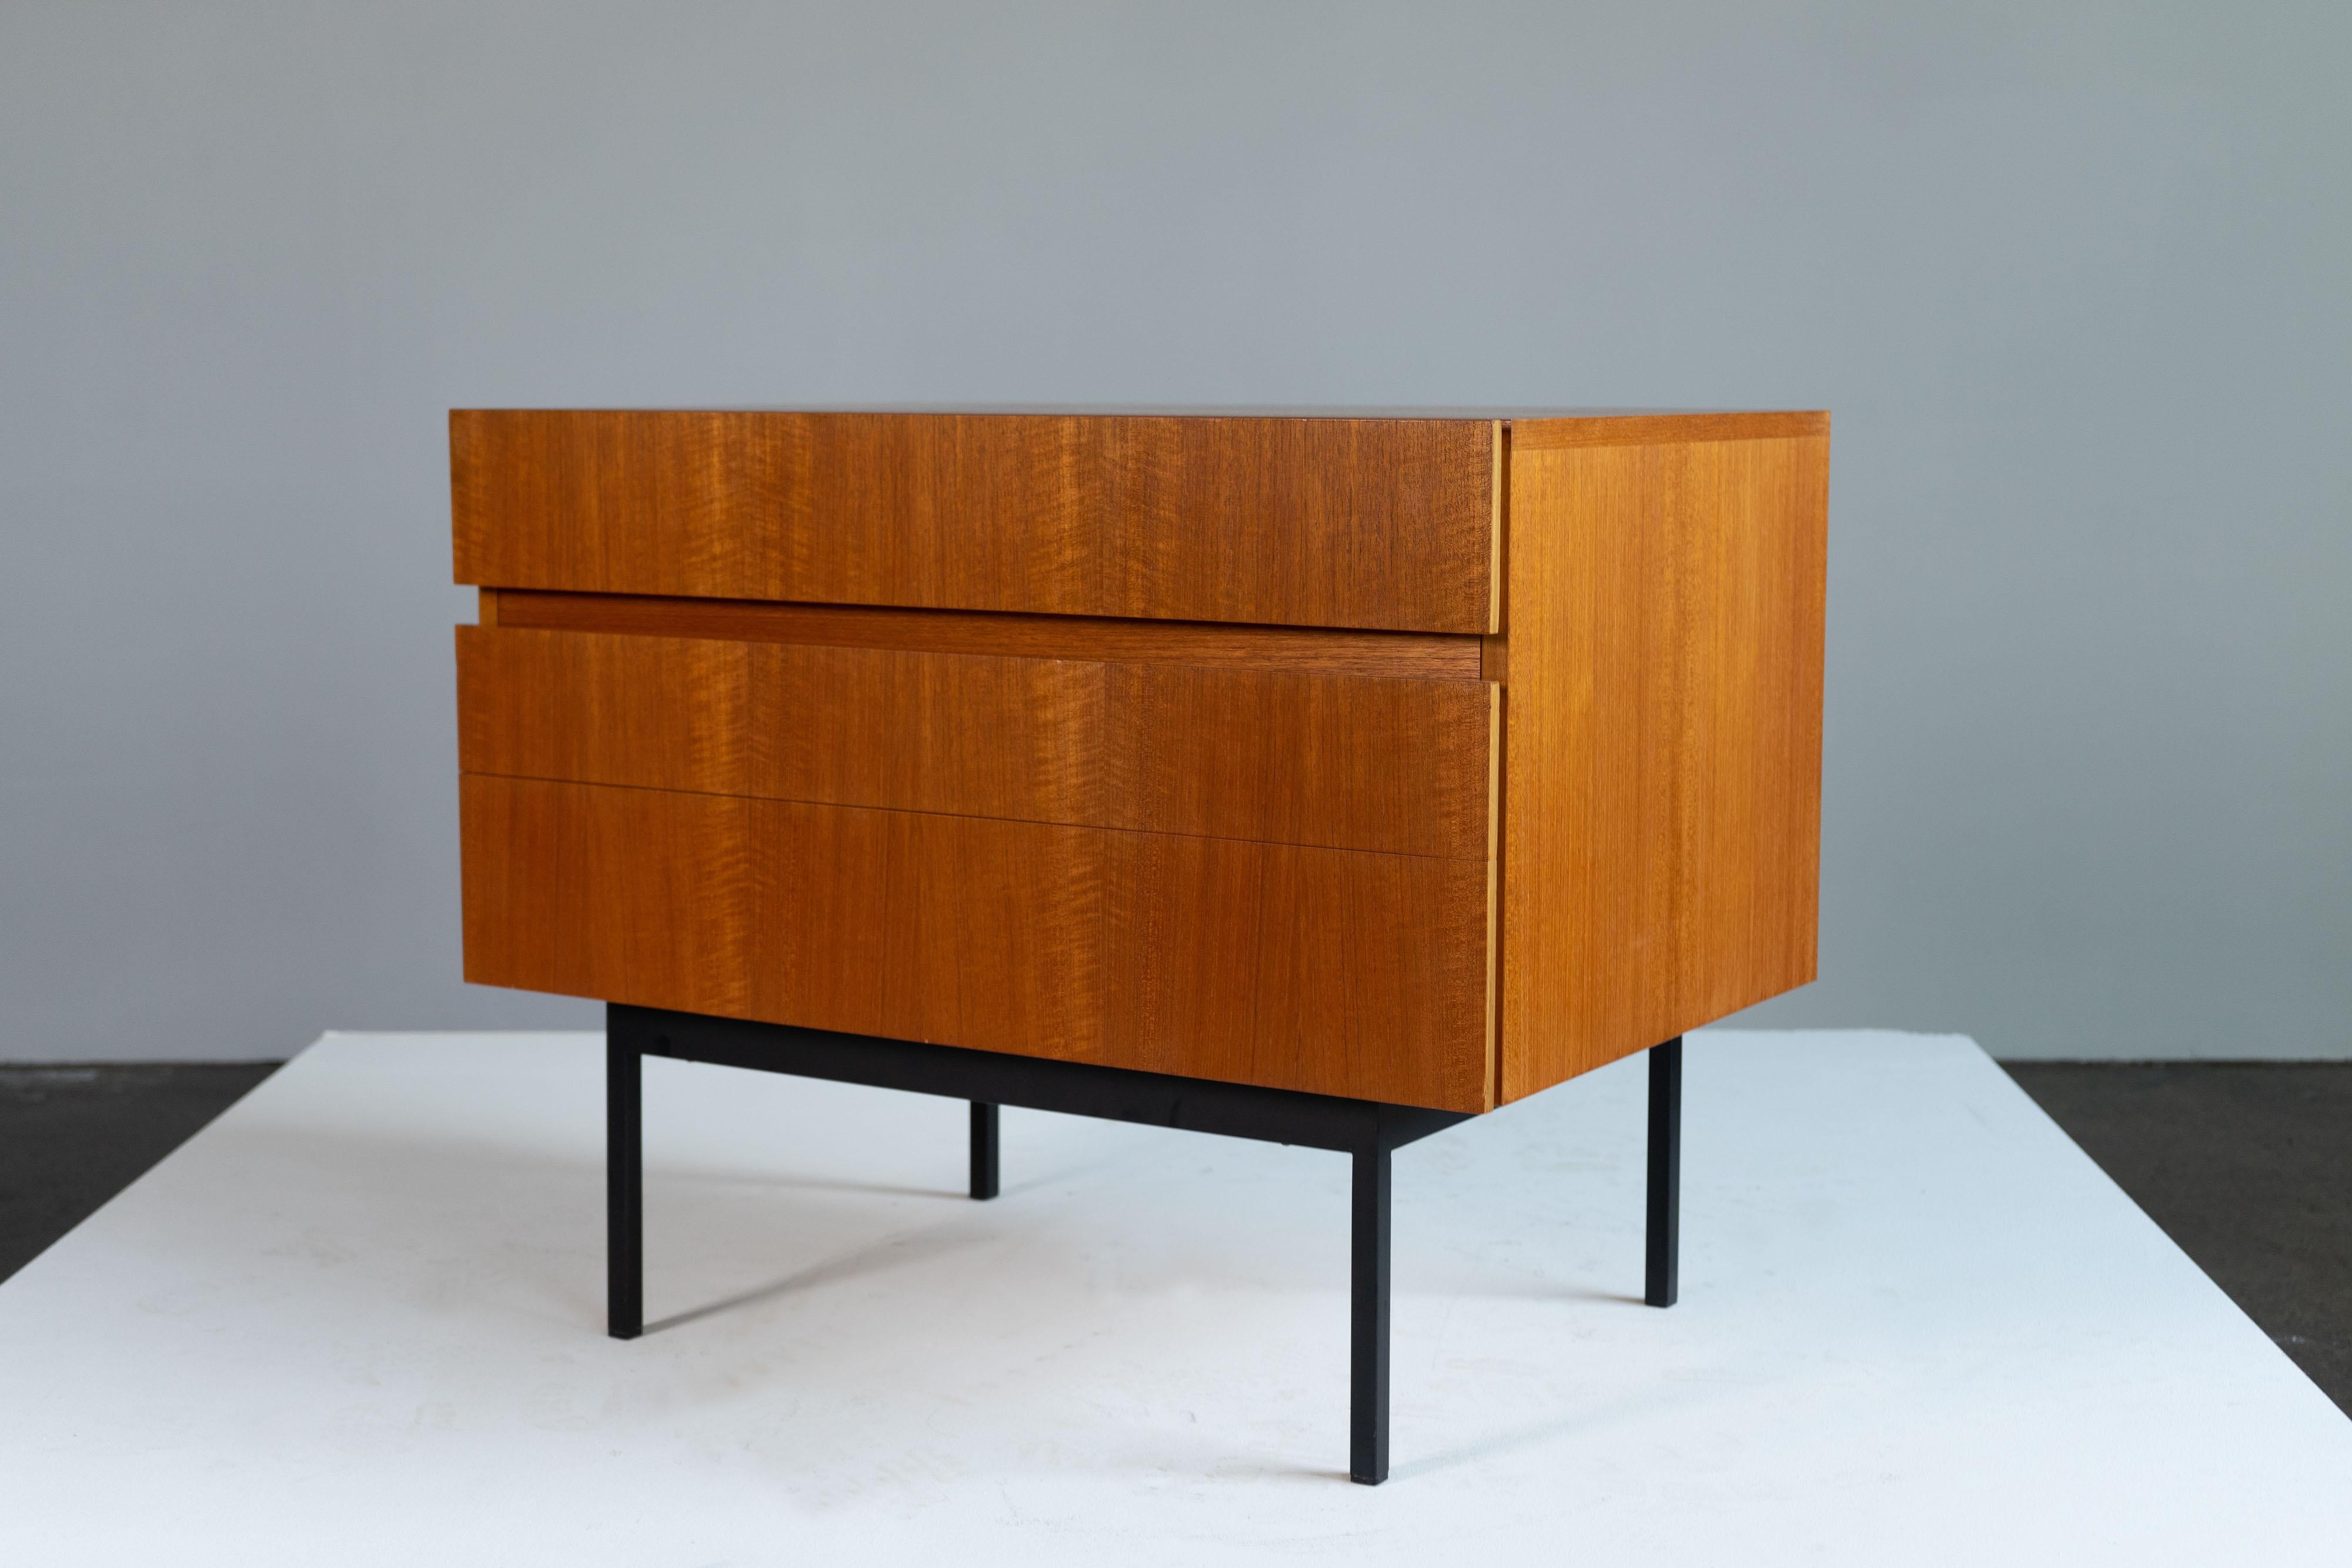 Steel Mid-Century Chest of Drawers by Dieter Waeckerlin for Behr, Teak, 1960s For Sale